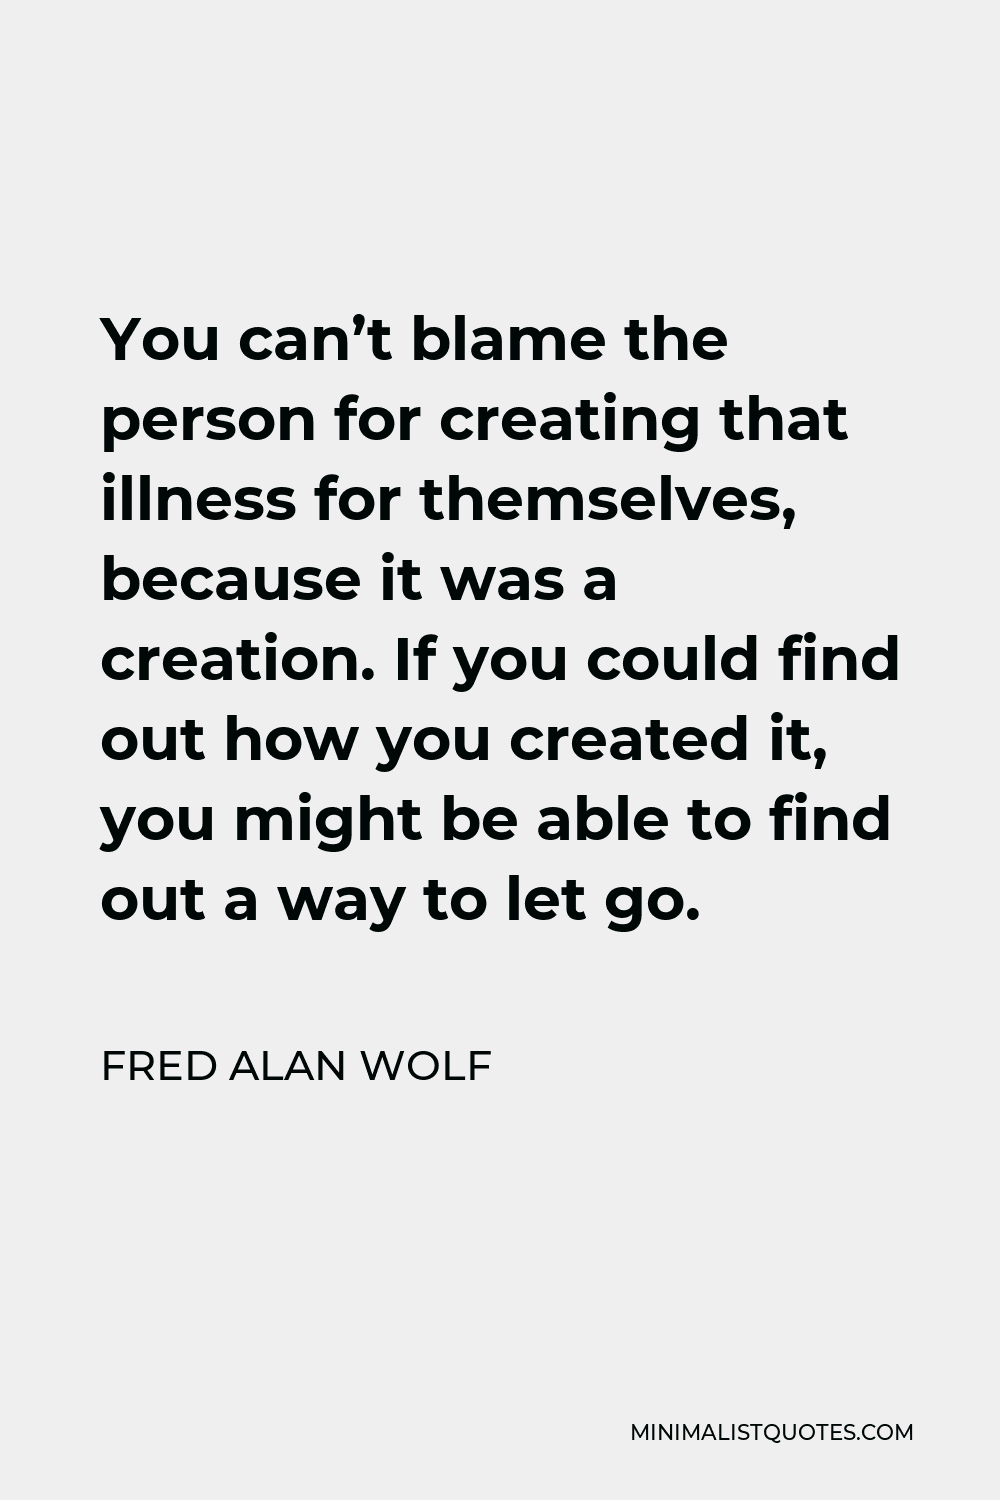 Fred Alan Wolf Quote - You can’t blame the person for creating that illness for themselves, because it was a creation. If you could find out how you created it, you might be able to find out a way to let go.